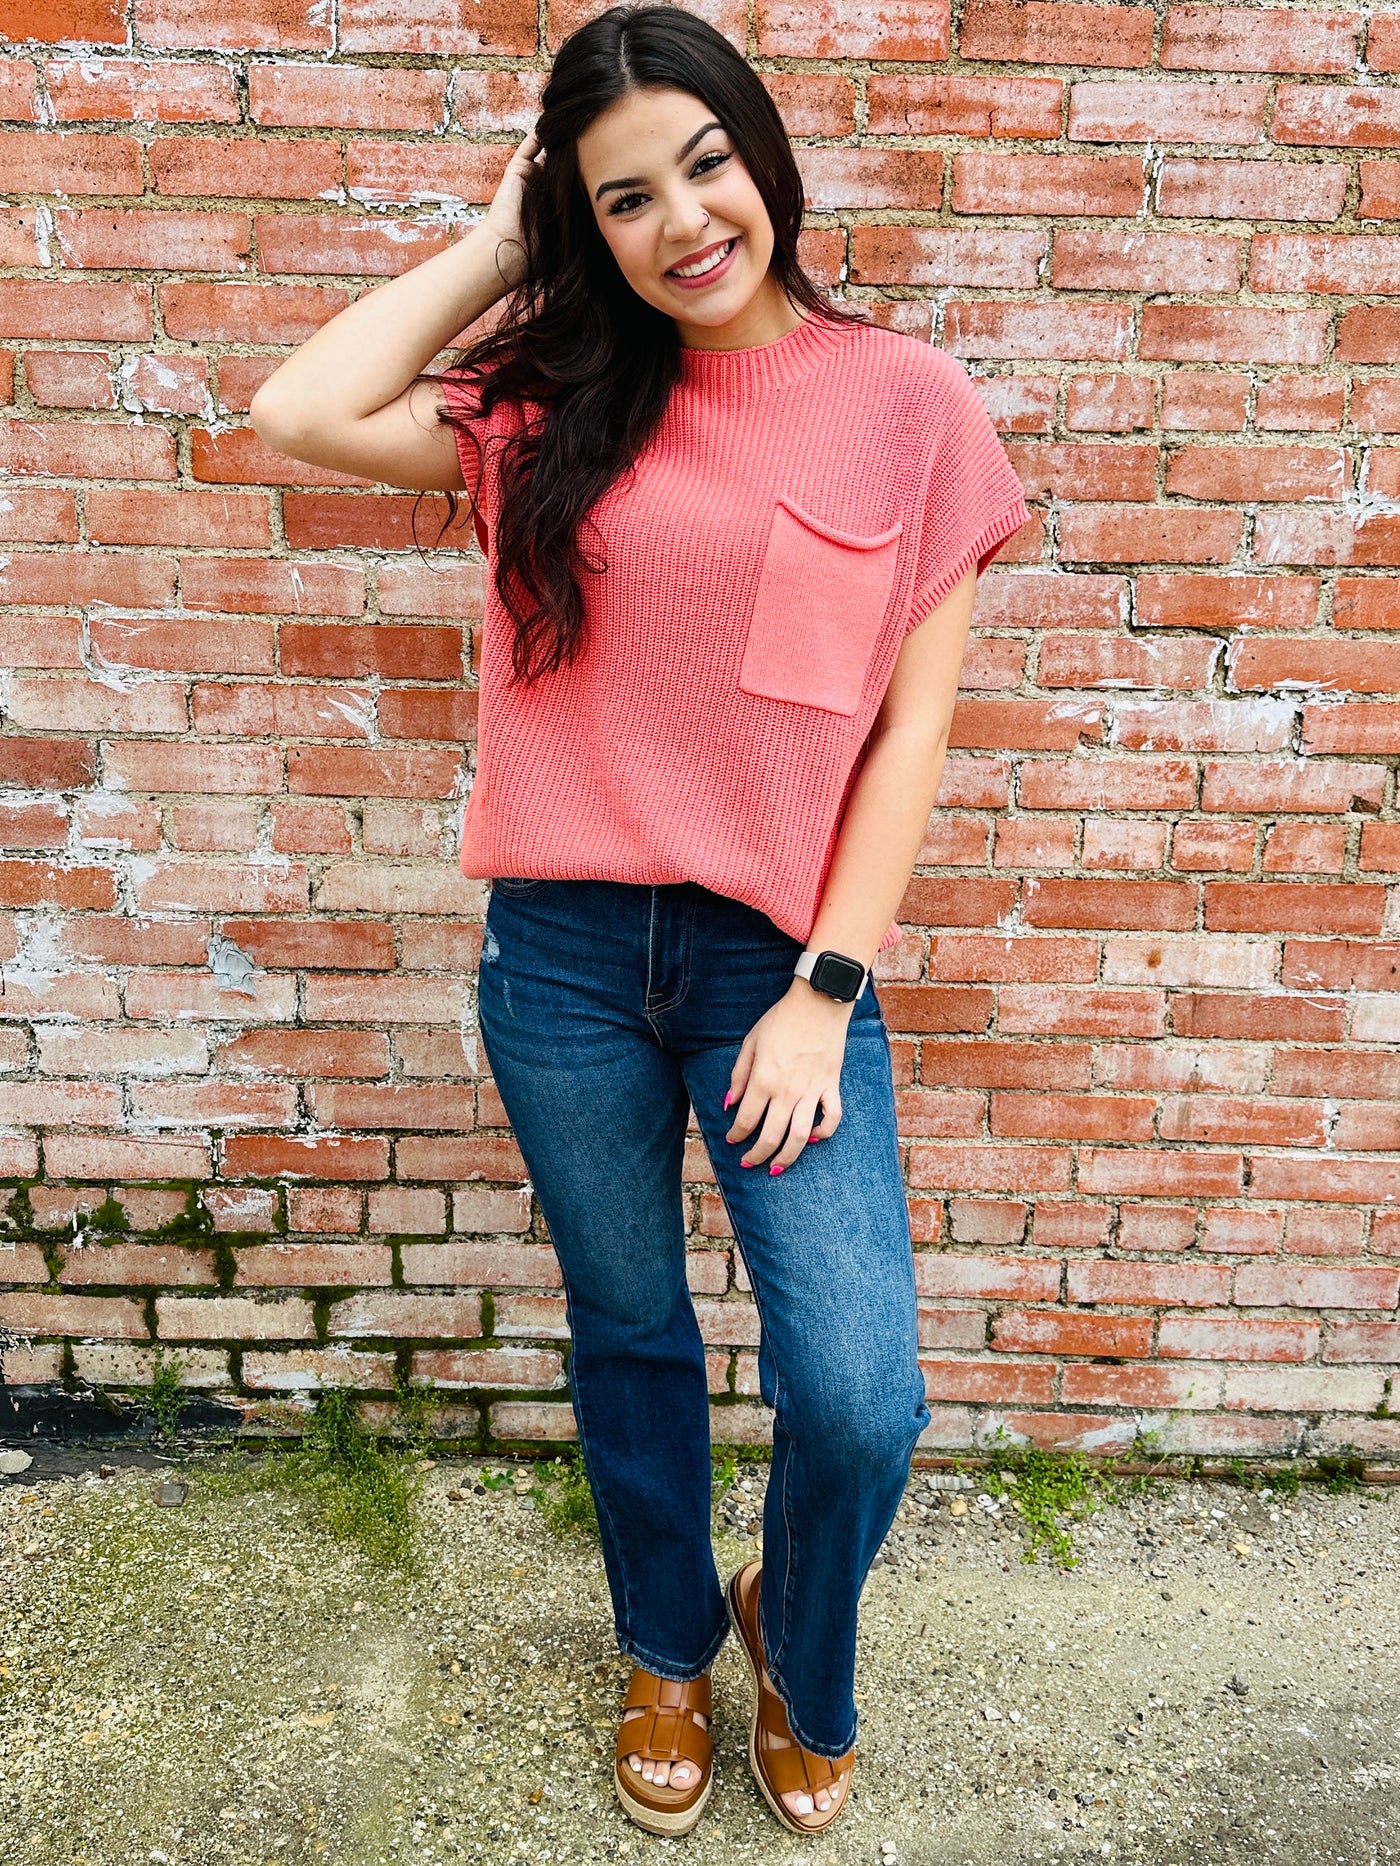 Until Next Time Sweater Top • Coral-Andree by Unit-Shop Anchored Bliss Women's Boutique Clothing Store